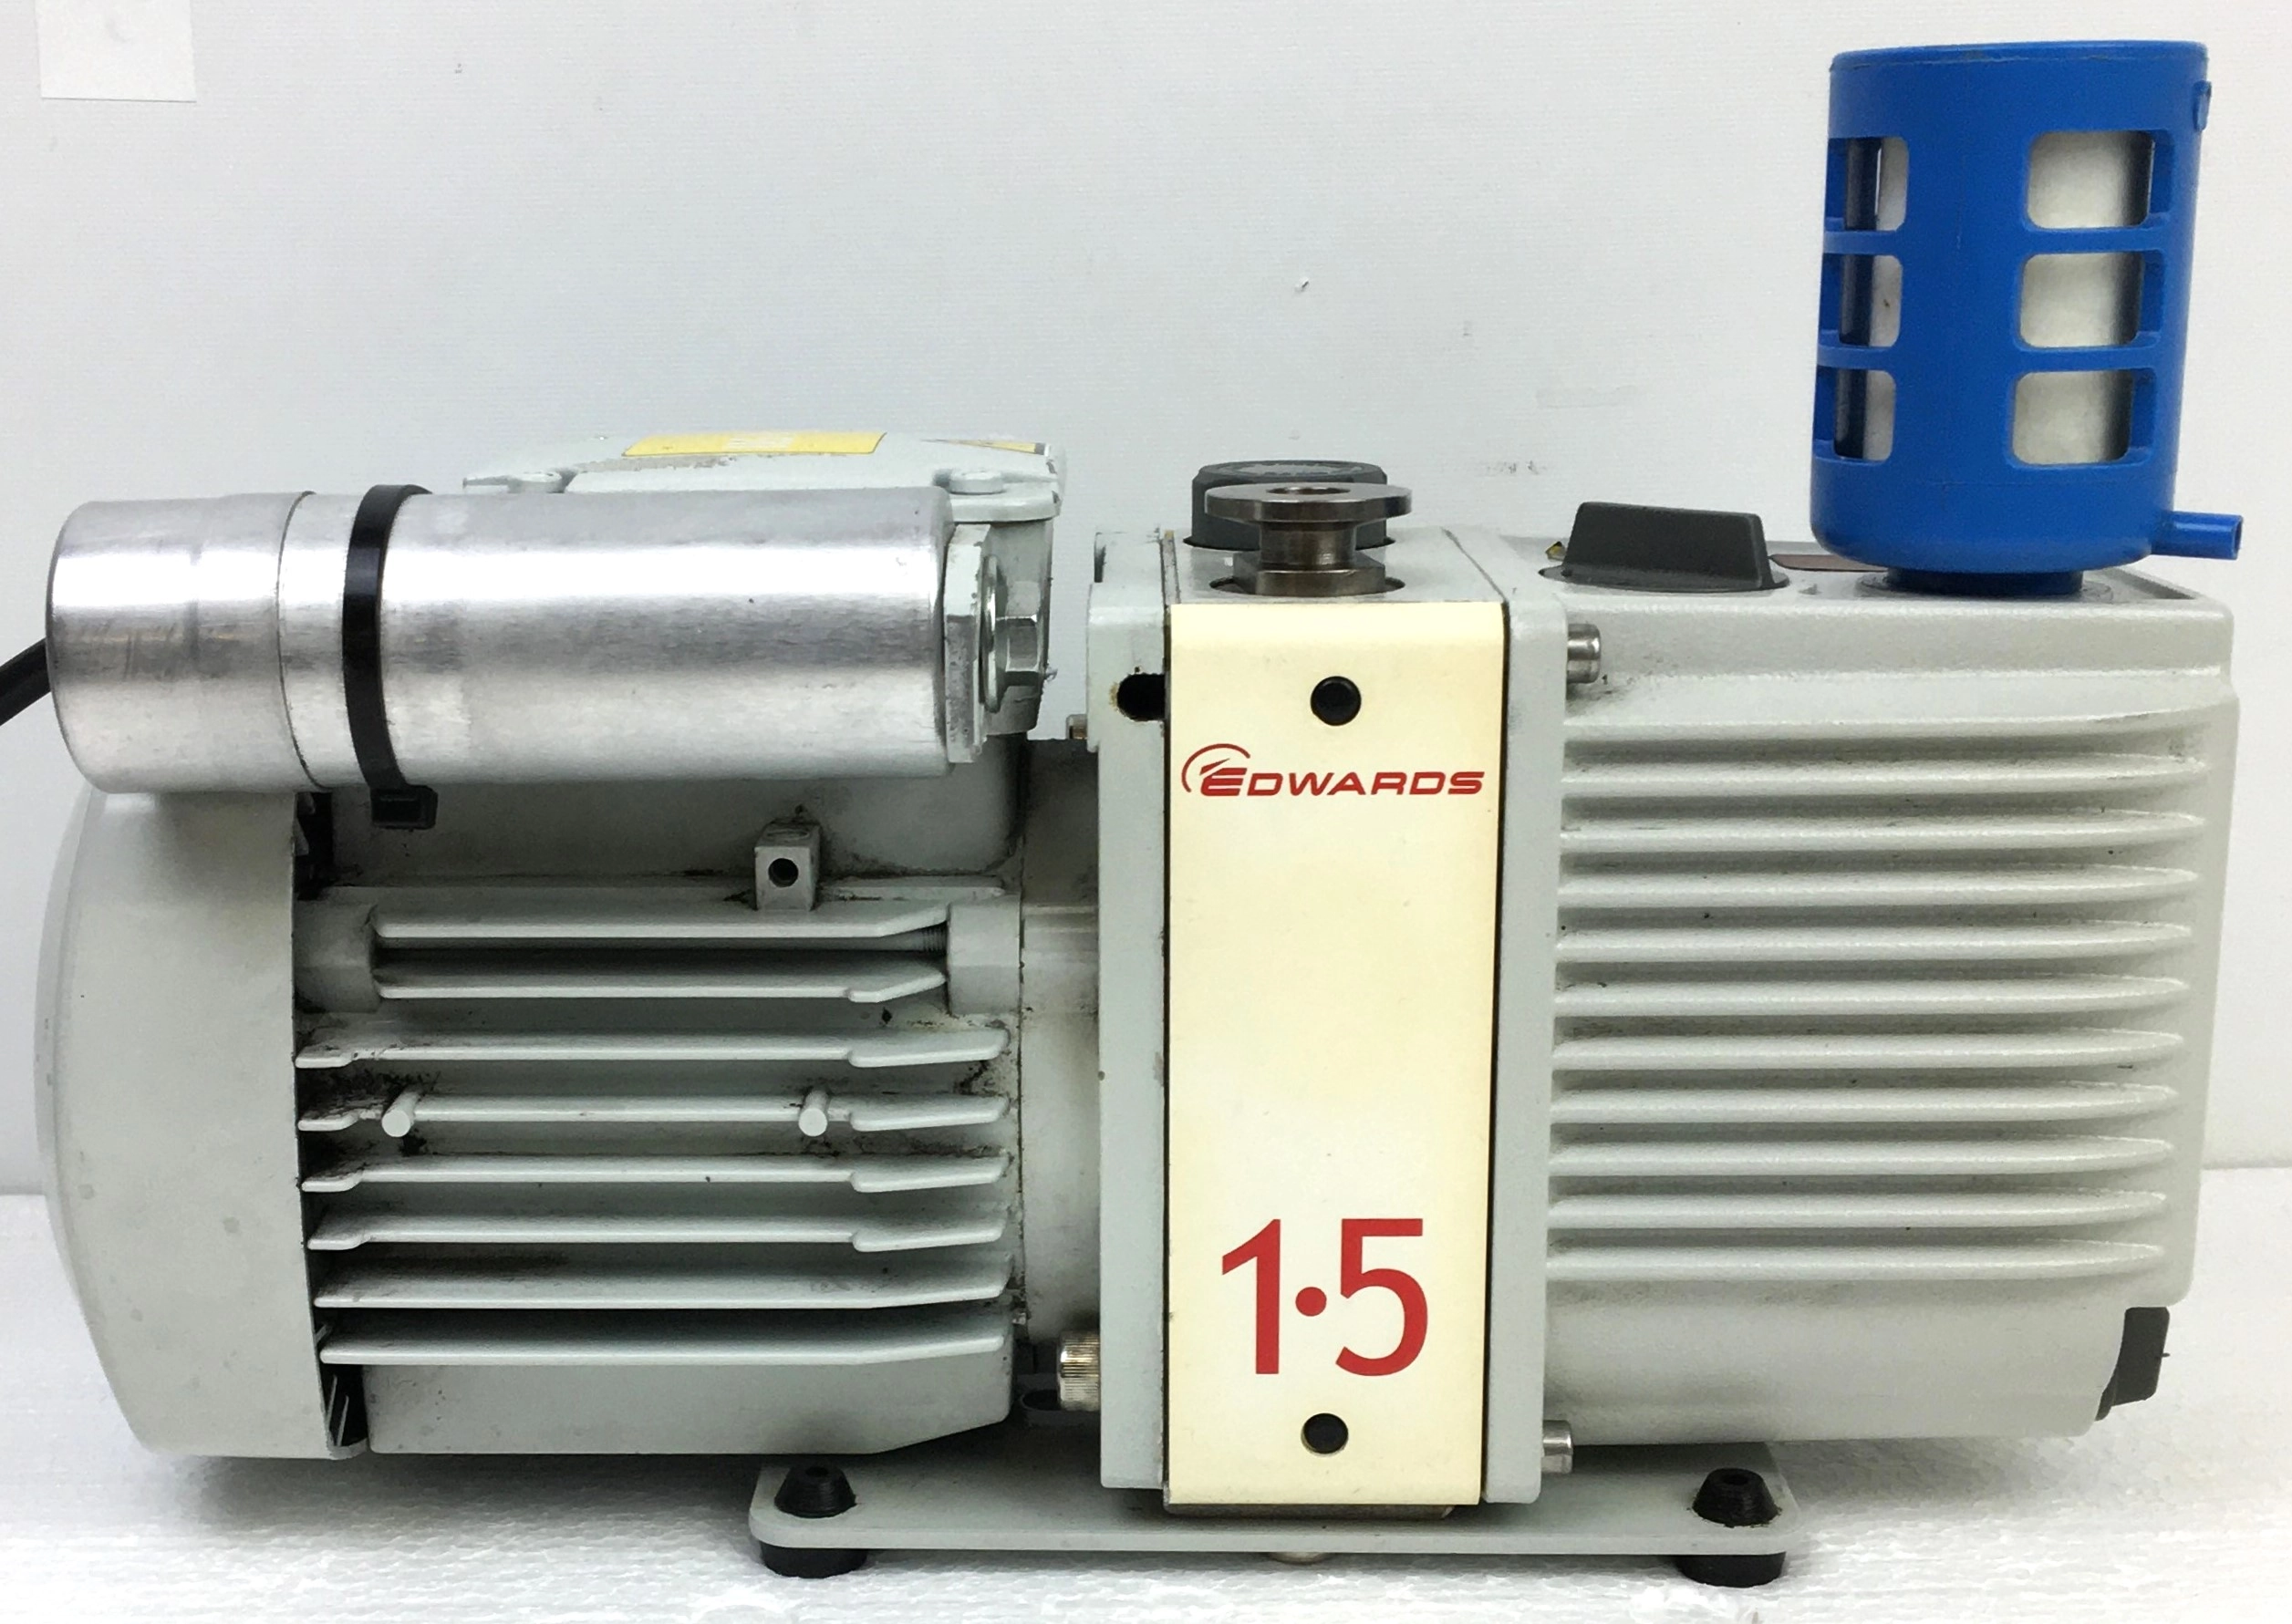 Edwards E2M1.5 Rotary Vacuum Pump with Oil Mist Filter (1.2cfm)